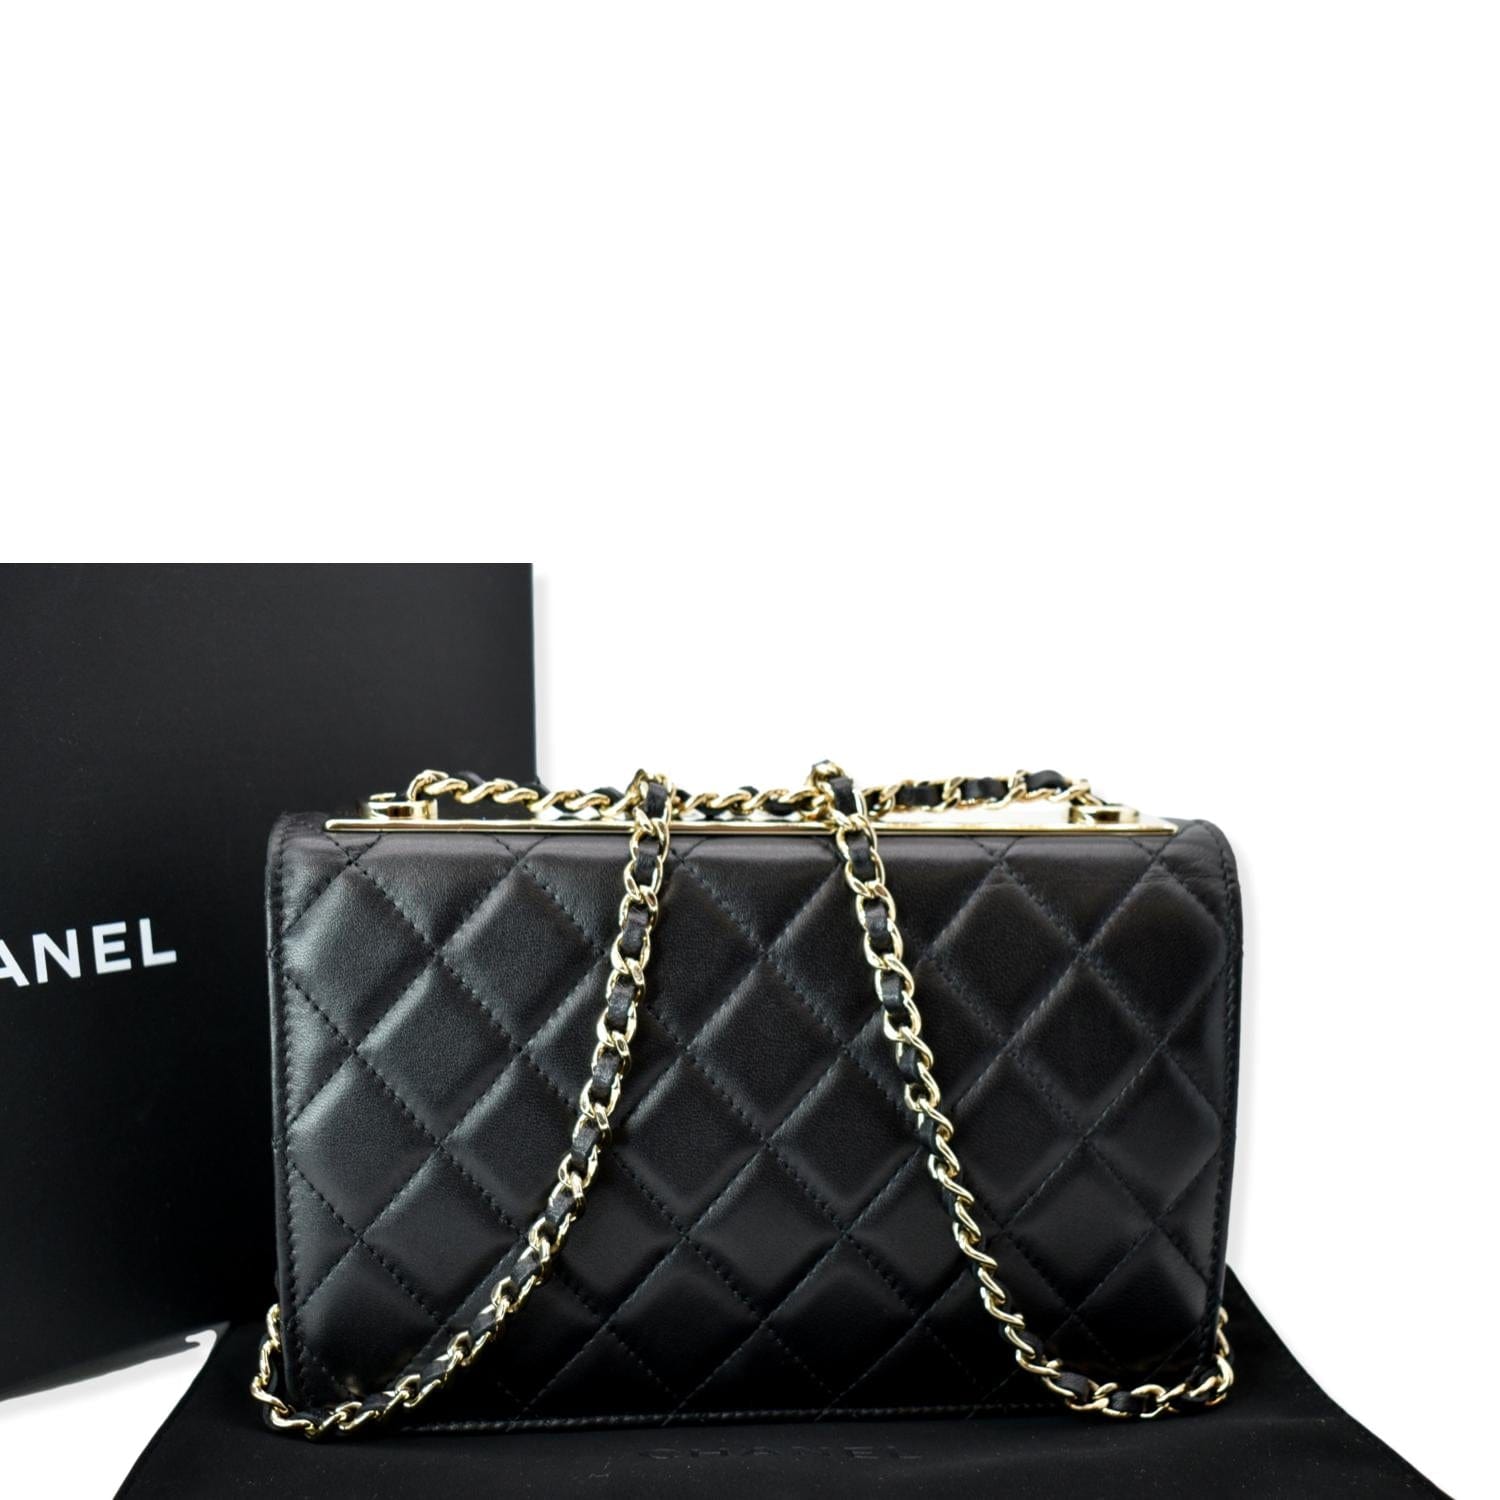 chanel wallet on chain clip